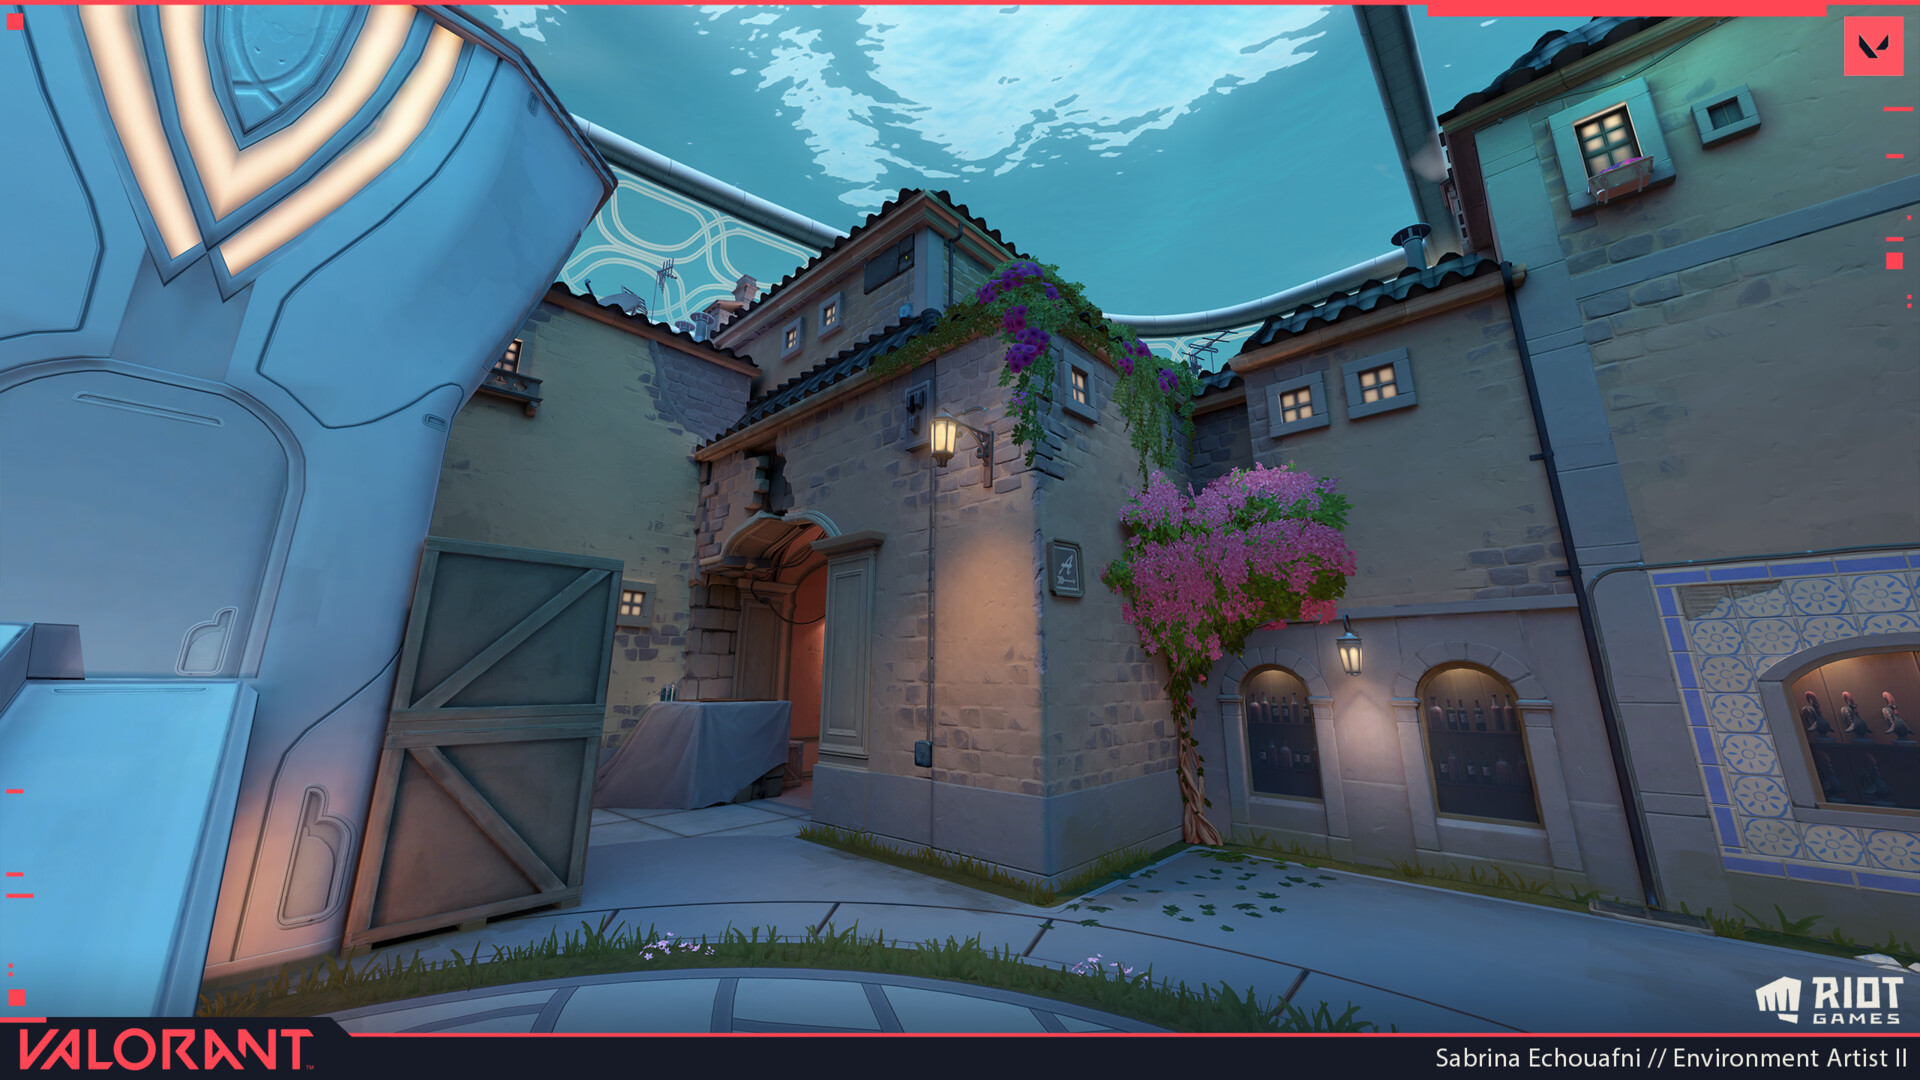 Thoughts on the new map? #valorant #pearl #sydnoiii